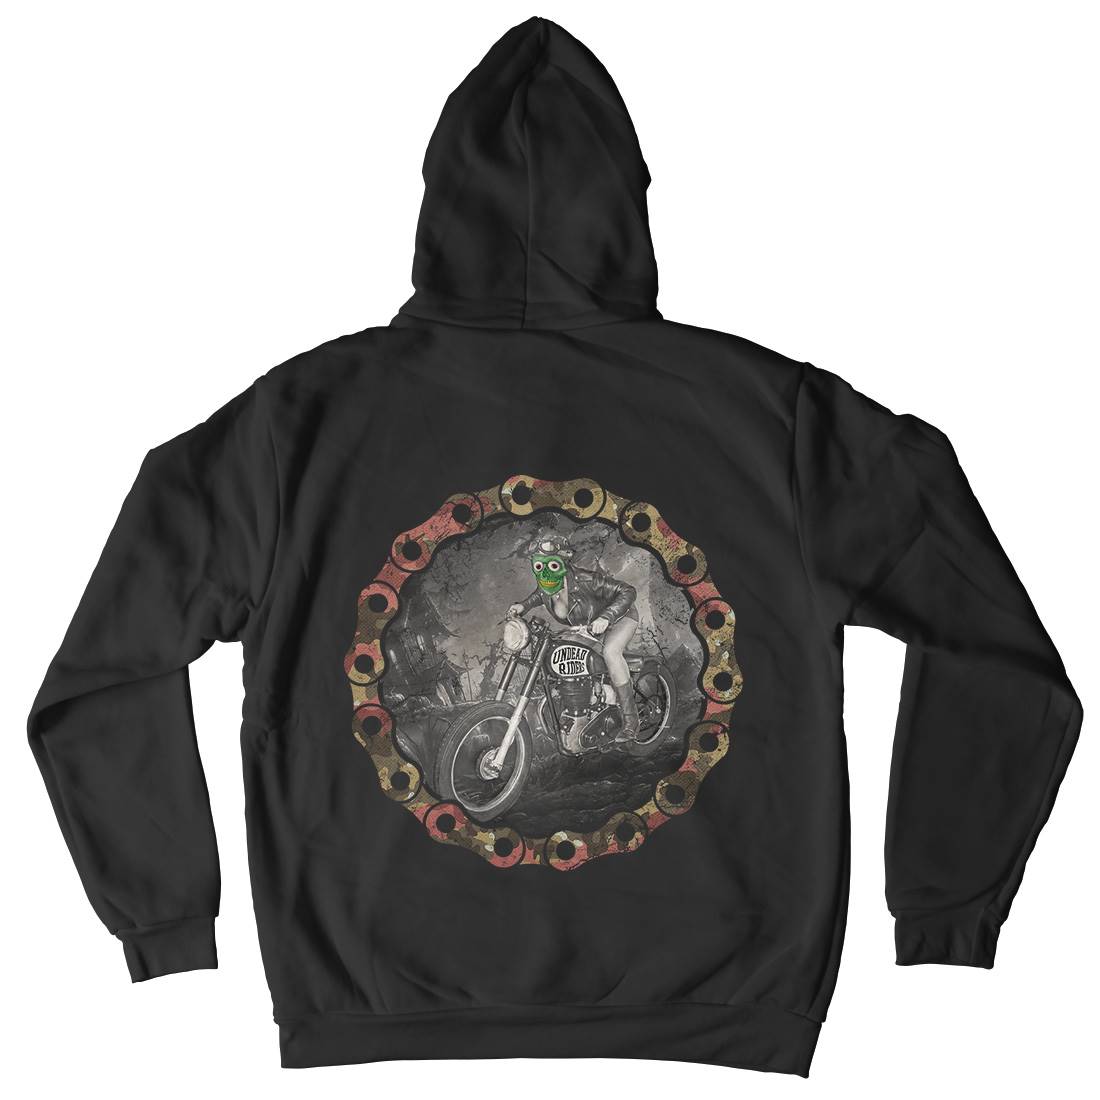 Undead Riders Kids Crew Neck Hoodie Motorcycles A937